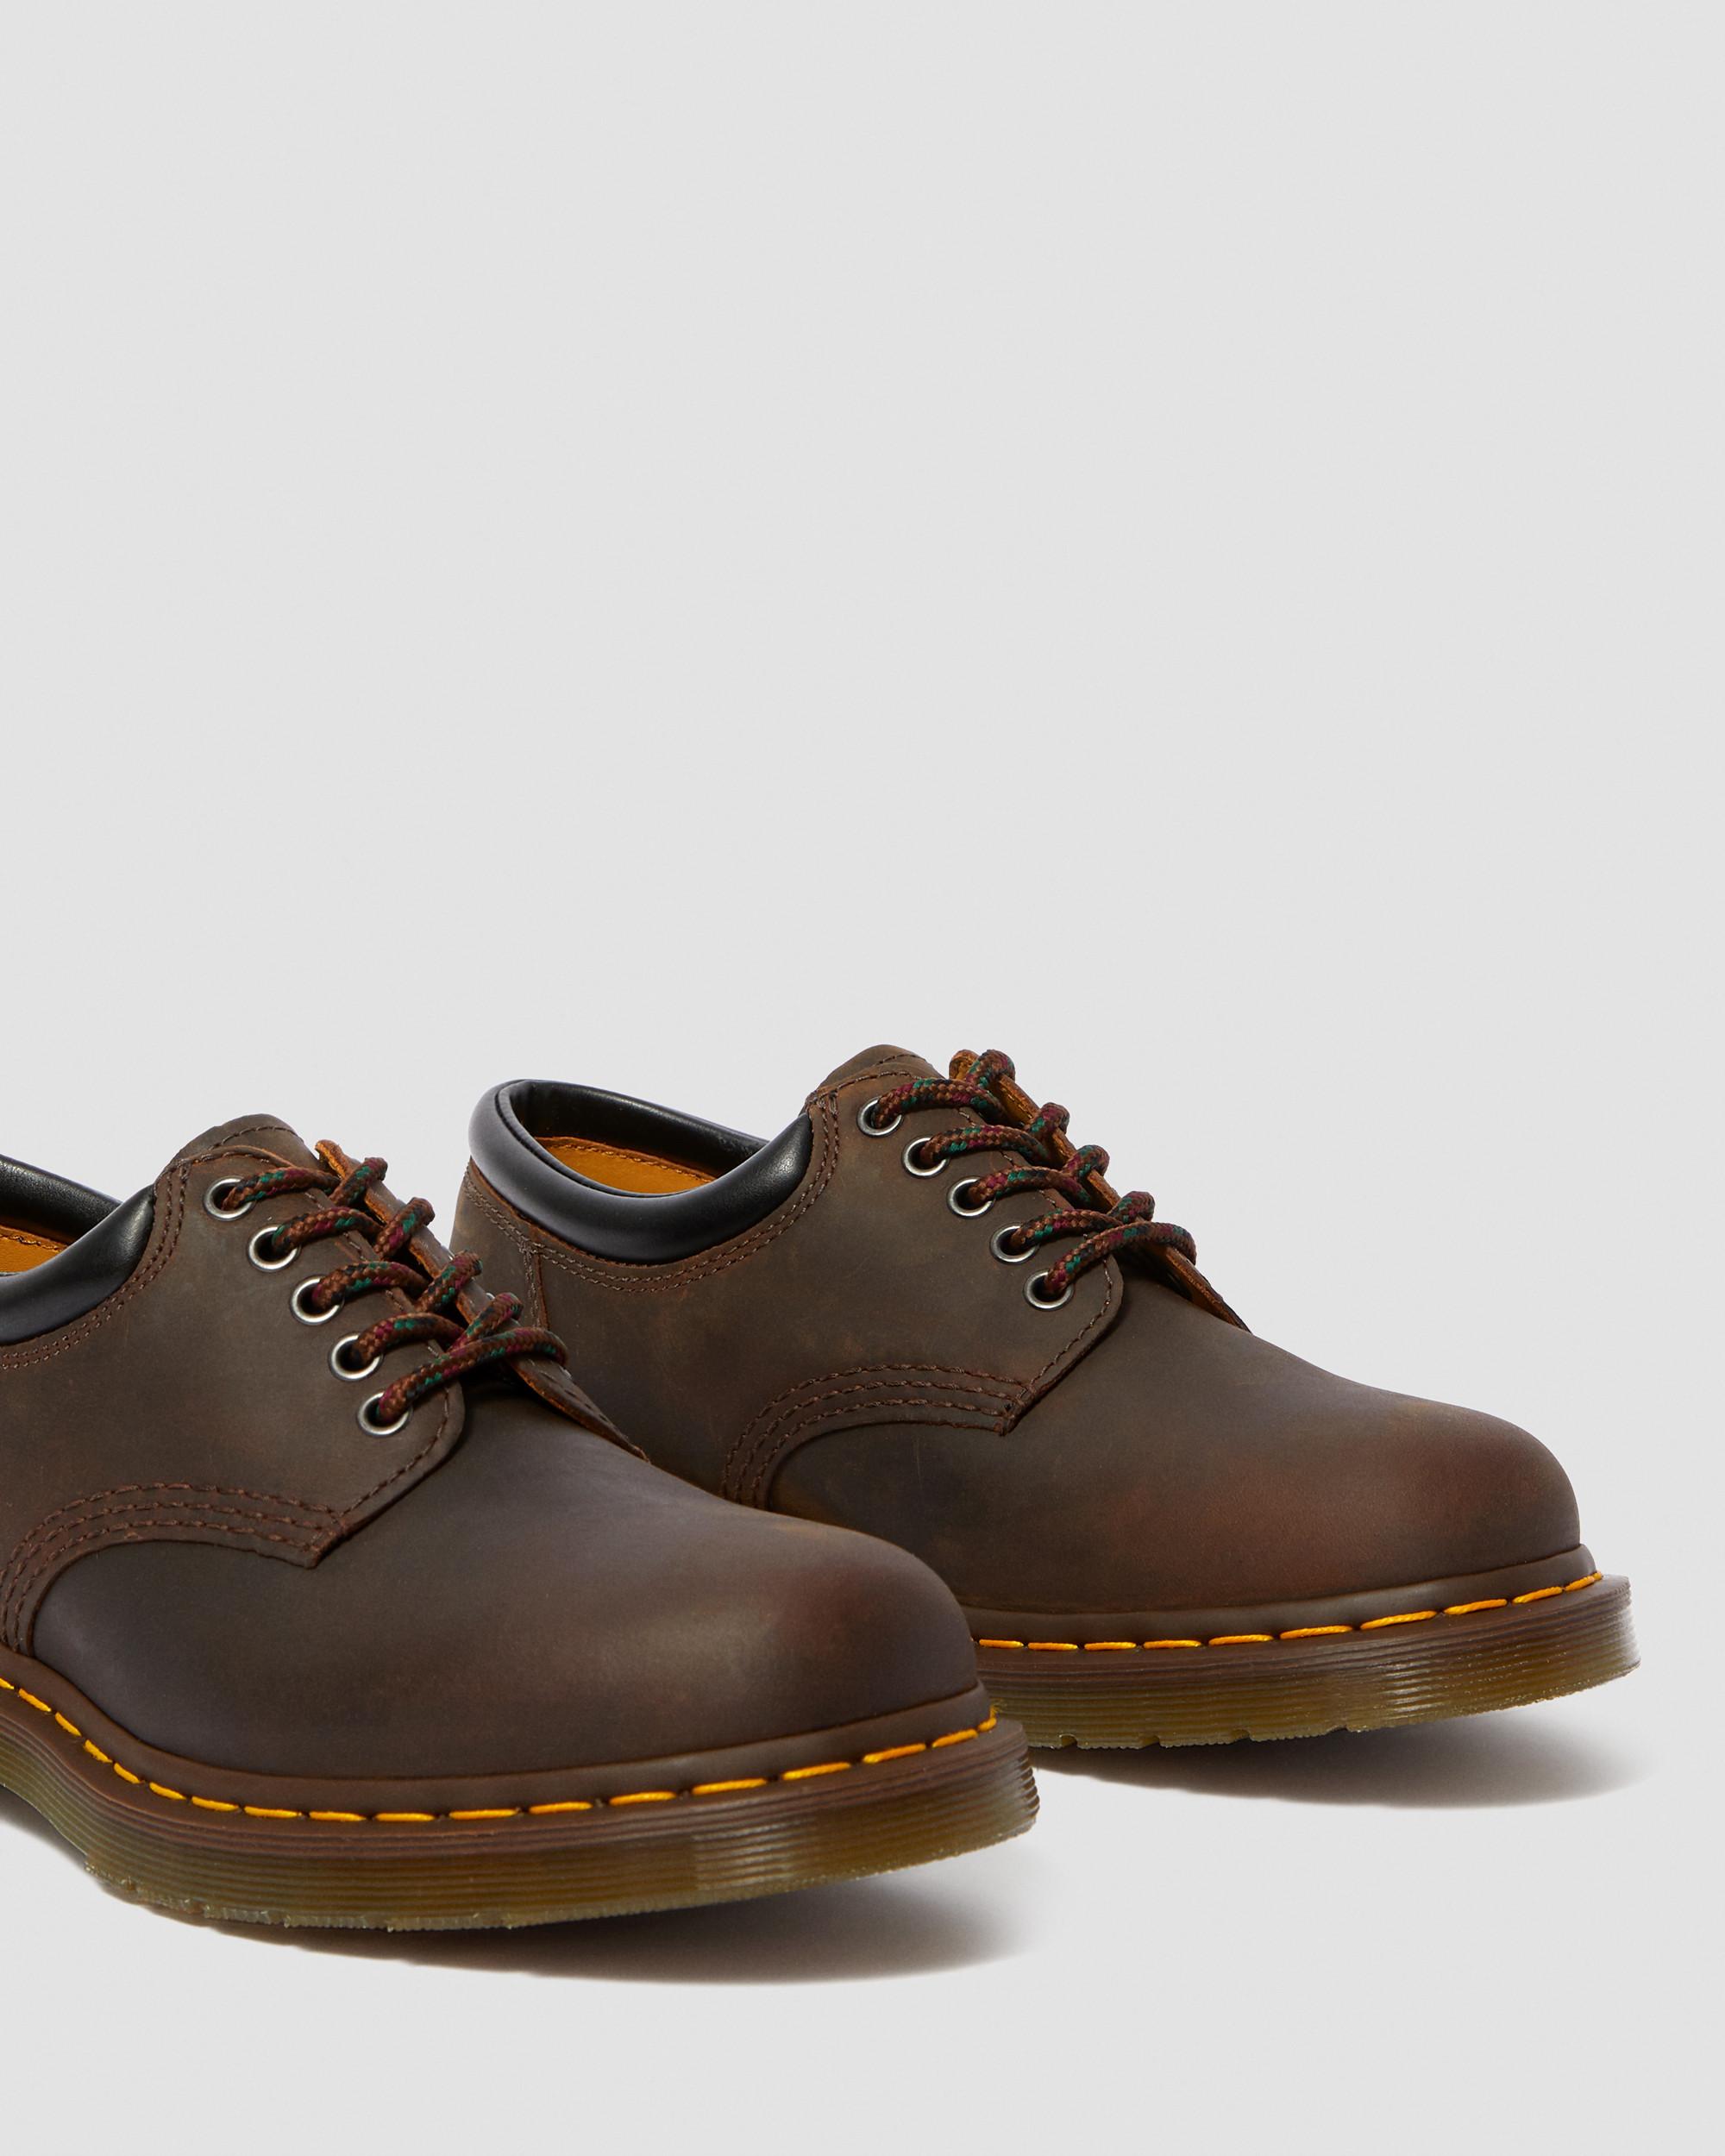 8053 CRAZY HORSE LEATHER CASUAL SHOES 